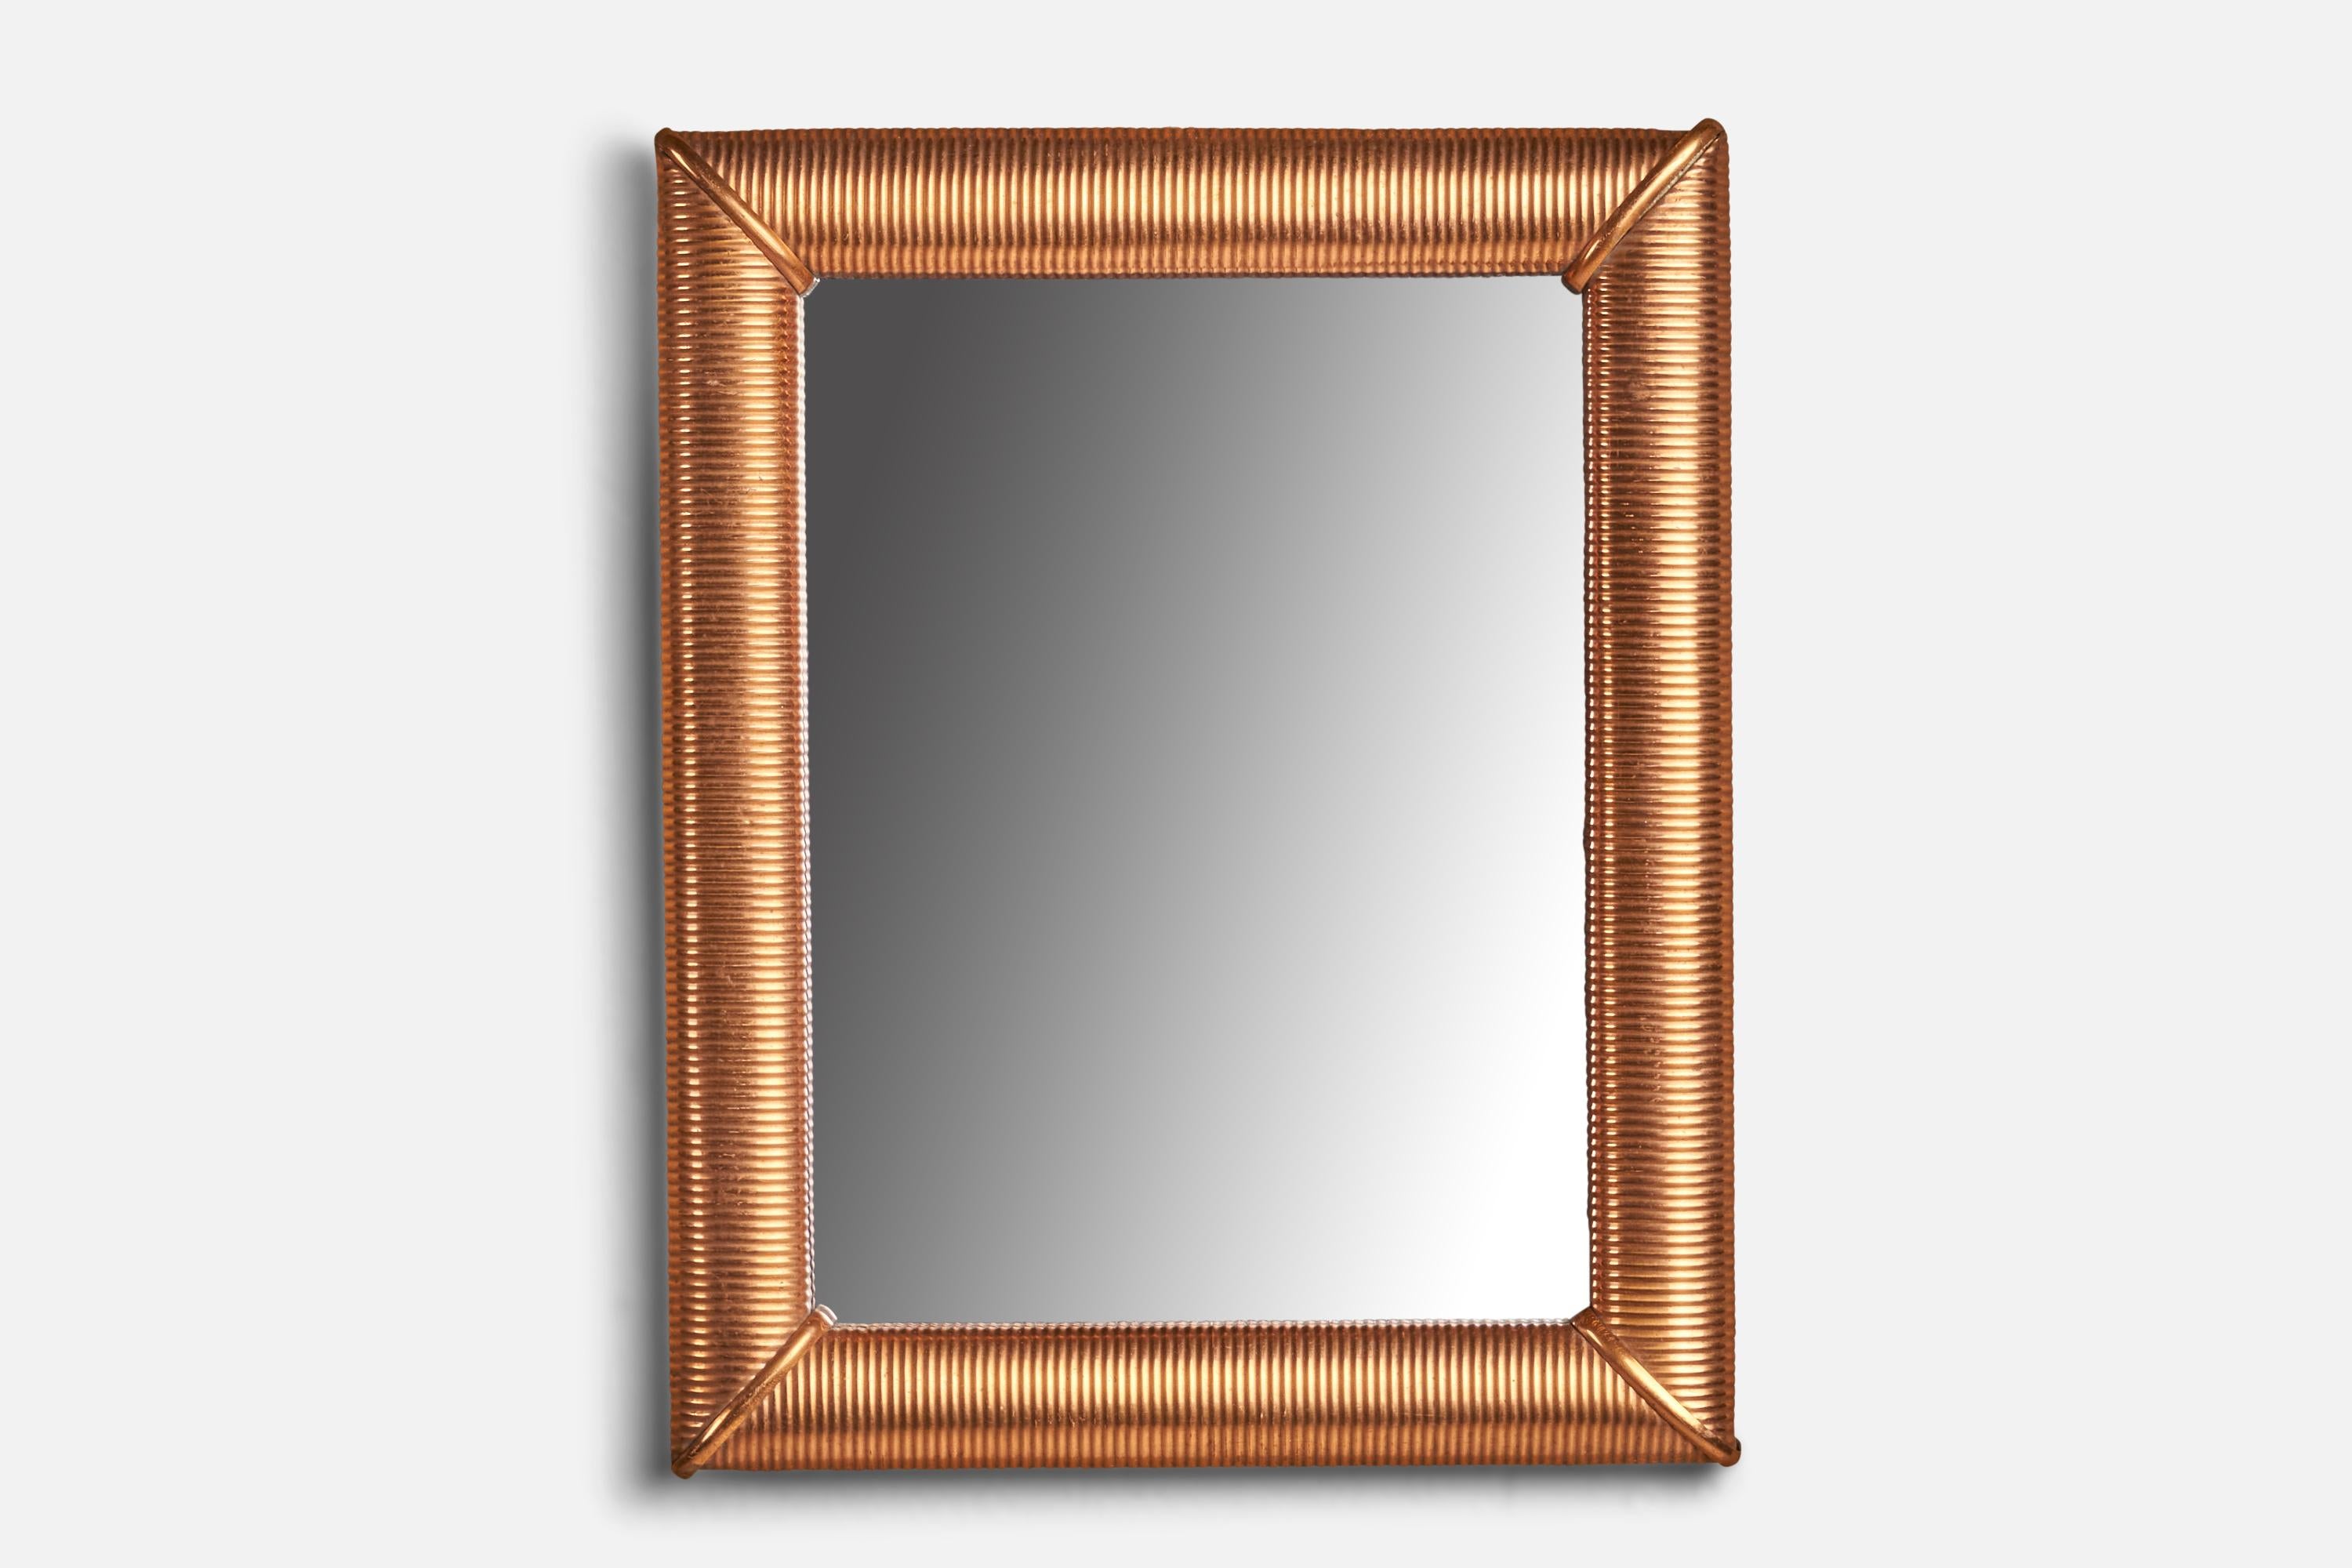 A copper wall mirror designed and produced in Italy, 1940s.